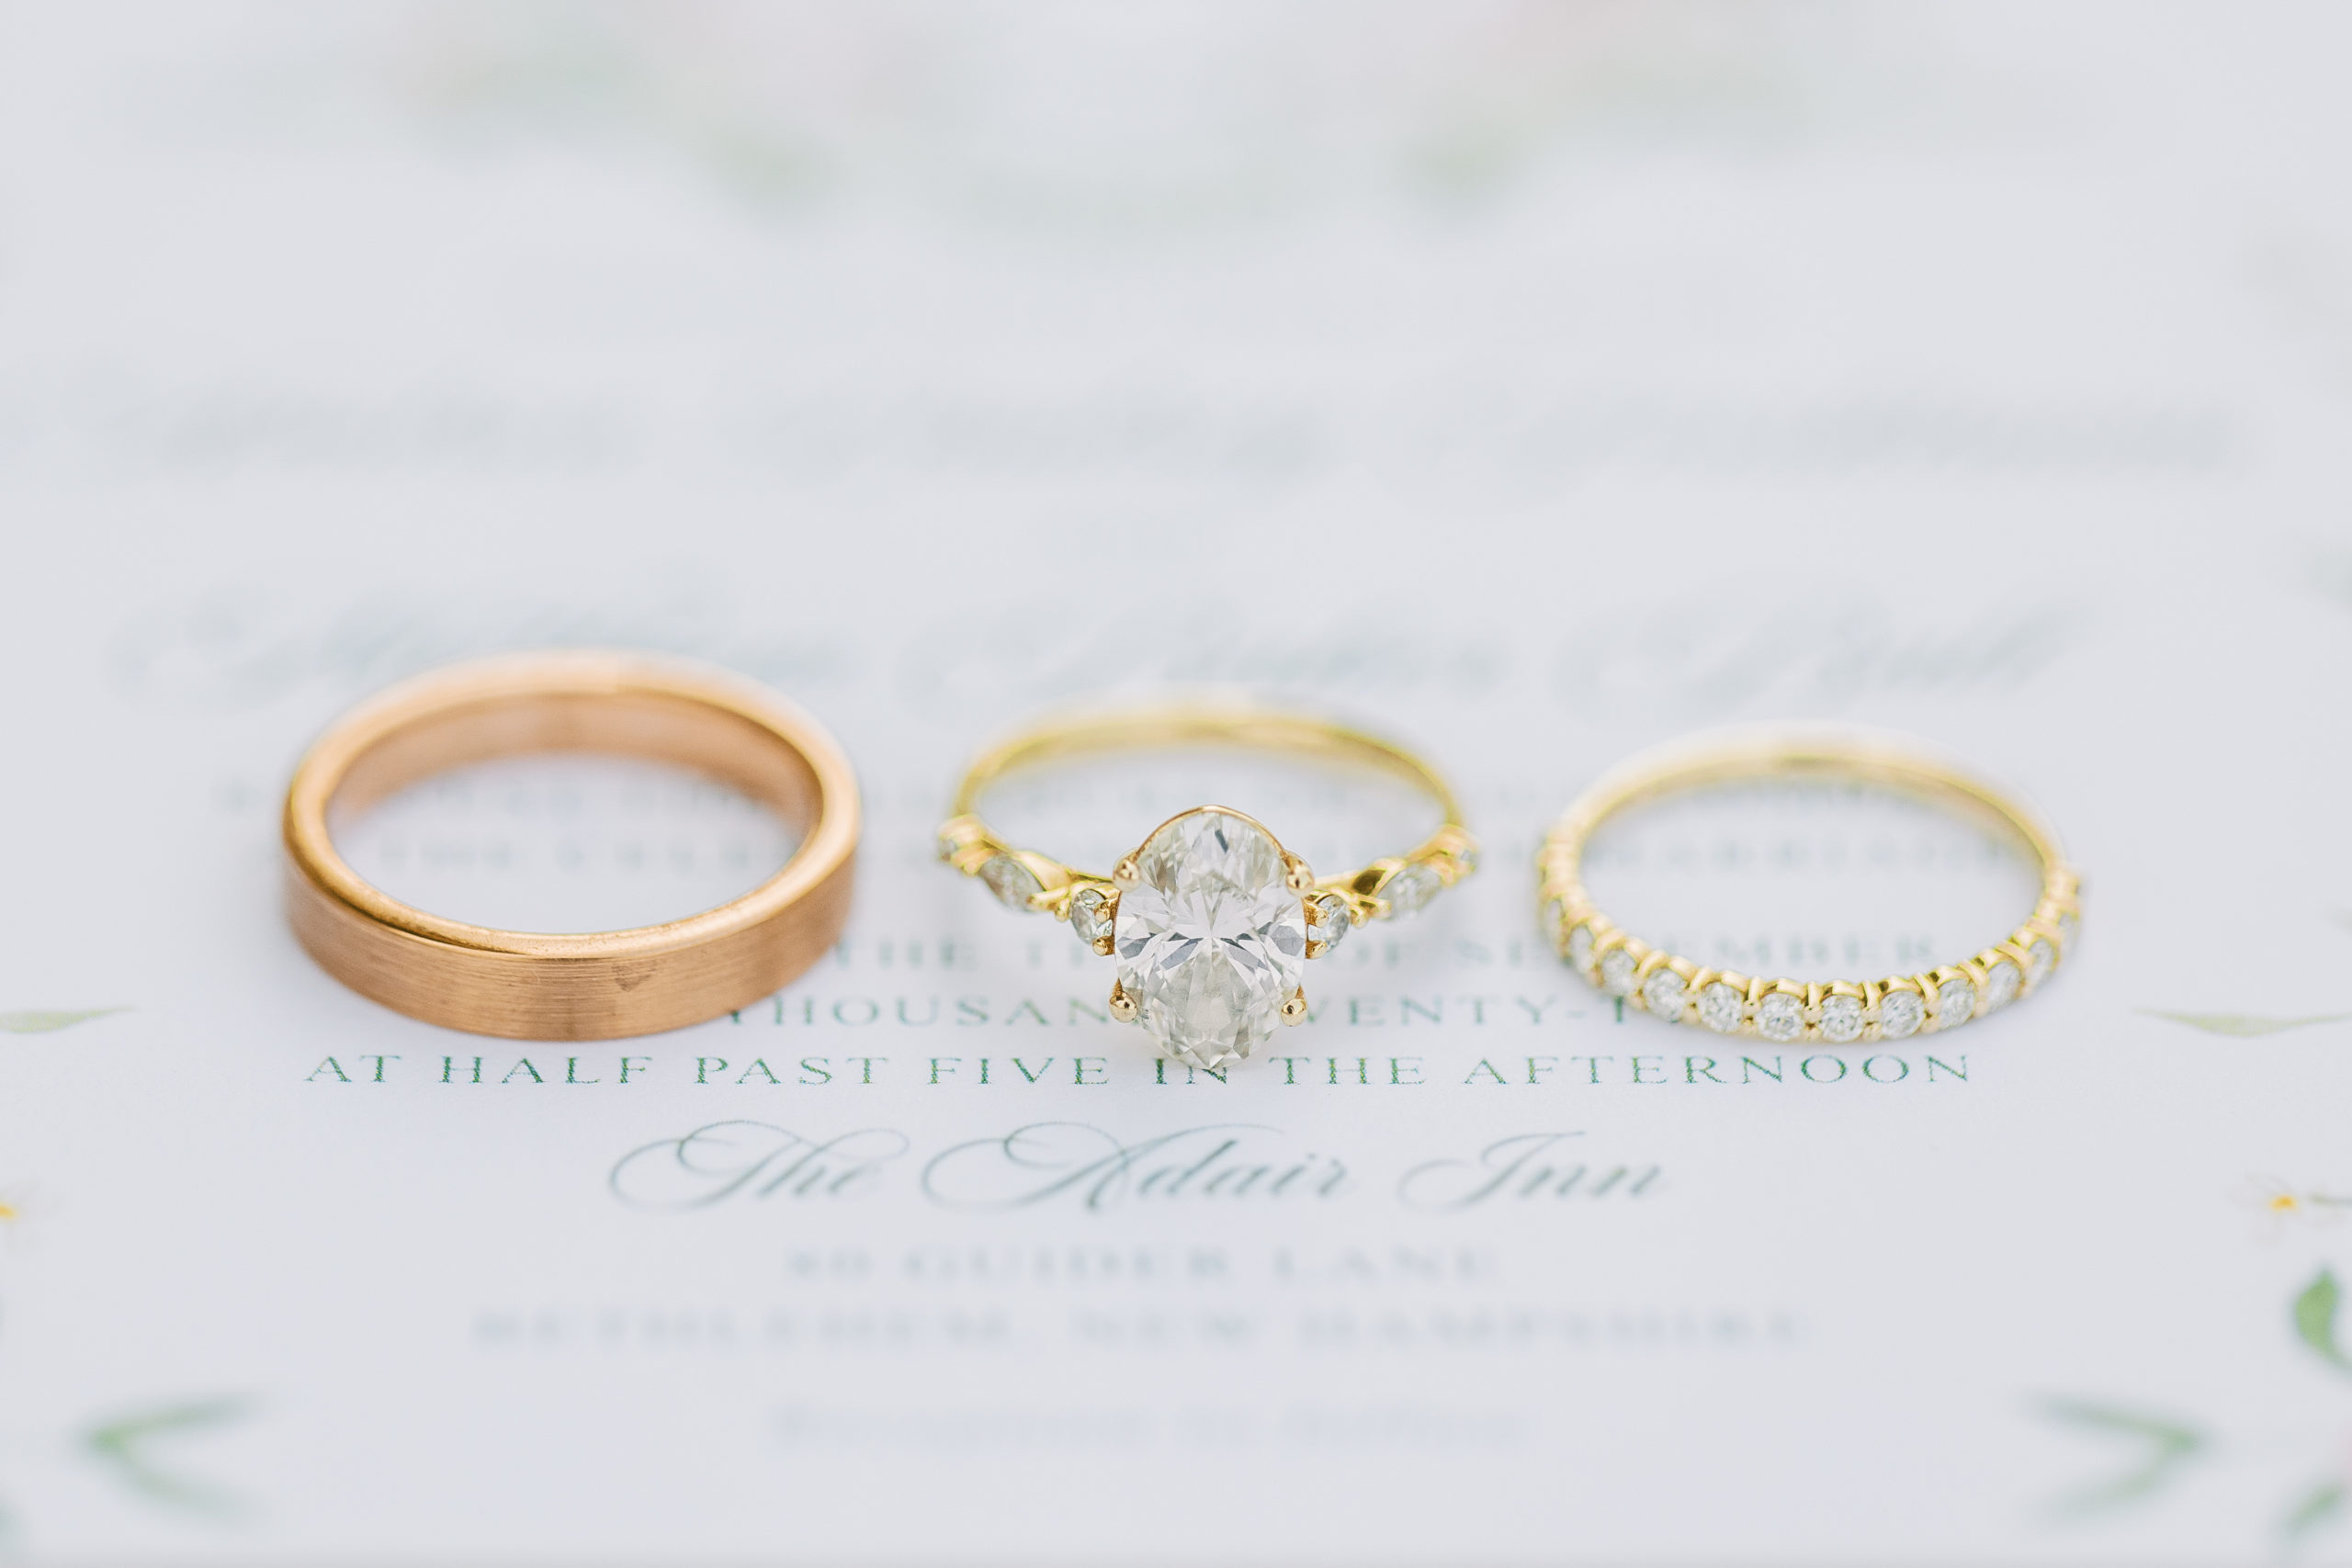 Up close view of wedding rings and band on top of wedding invitations